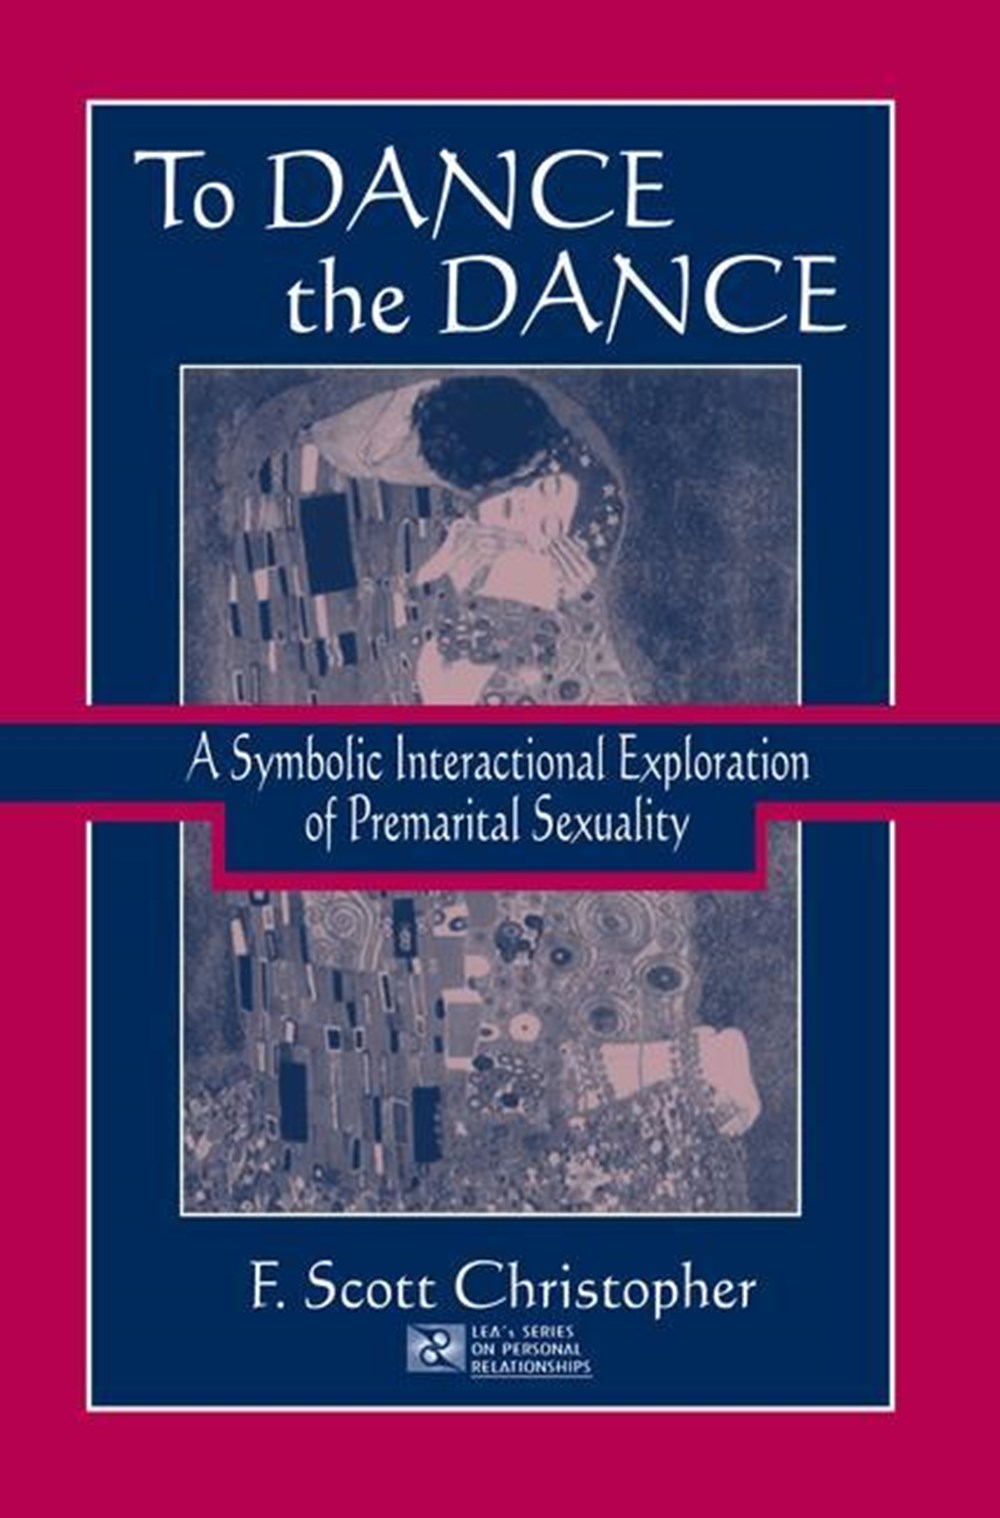 To Dance the Dance: A Symbolic Interactional Exploration of Premarital Sexuality